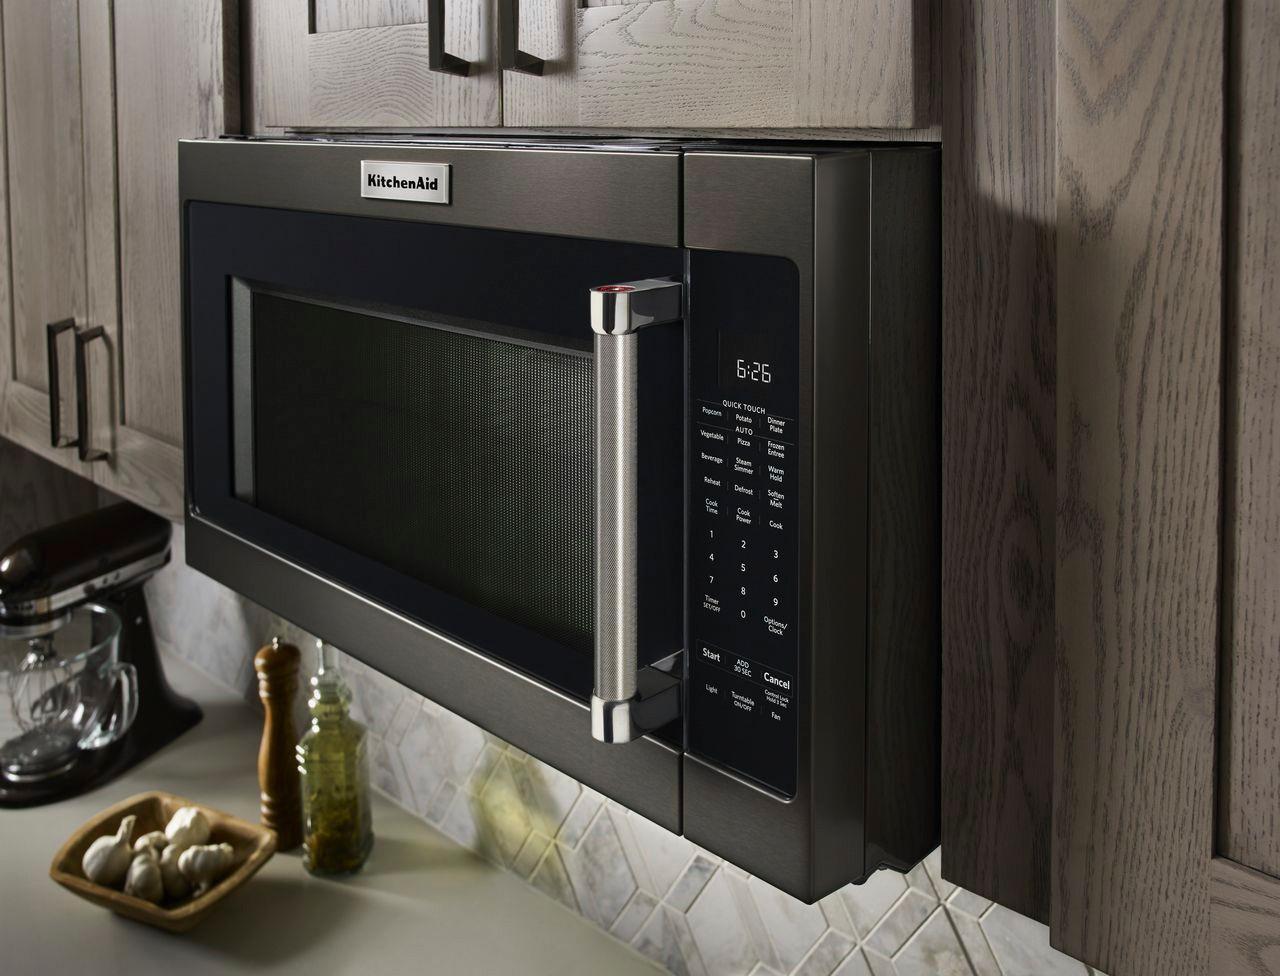 KitchenAid 2.0 Cu. Ft. Over-the-Range Microwave with Sensor Cooking Kitchenaid Over The Range Microwave Black Stainless Steel